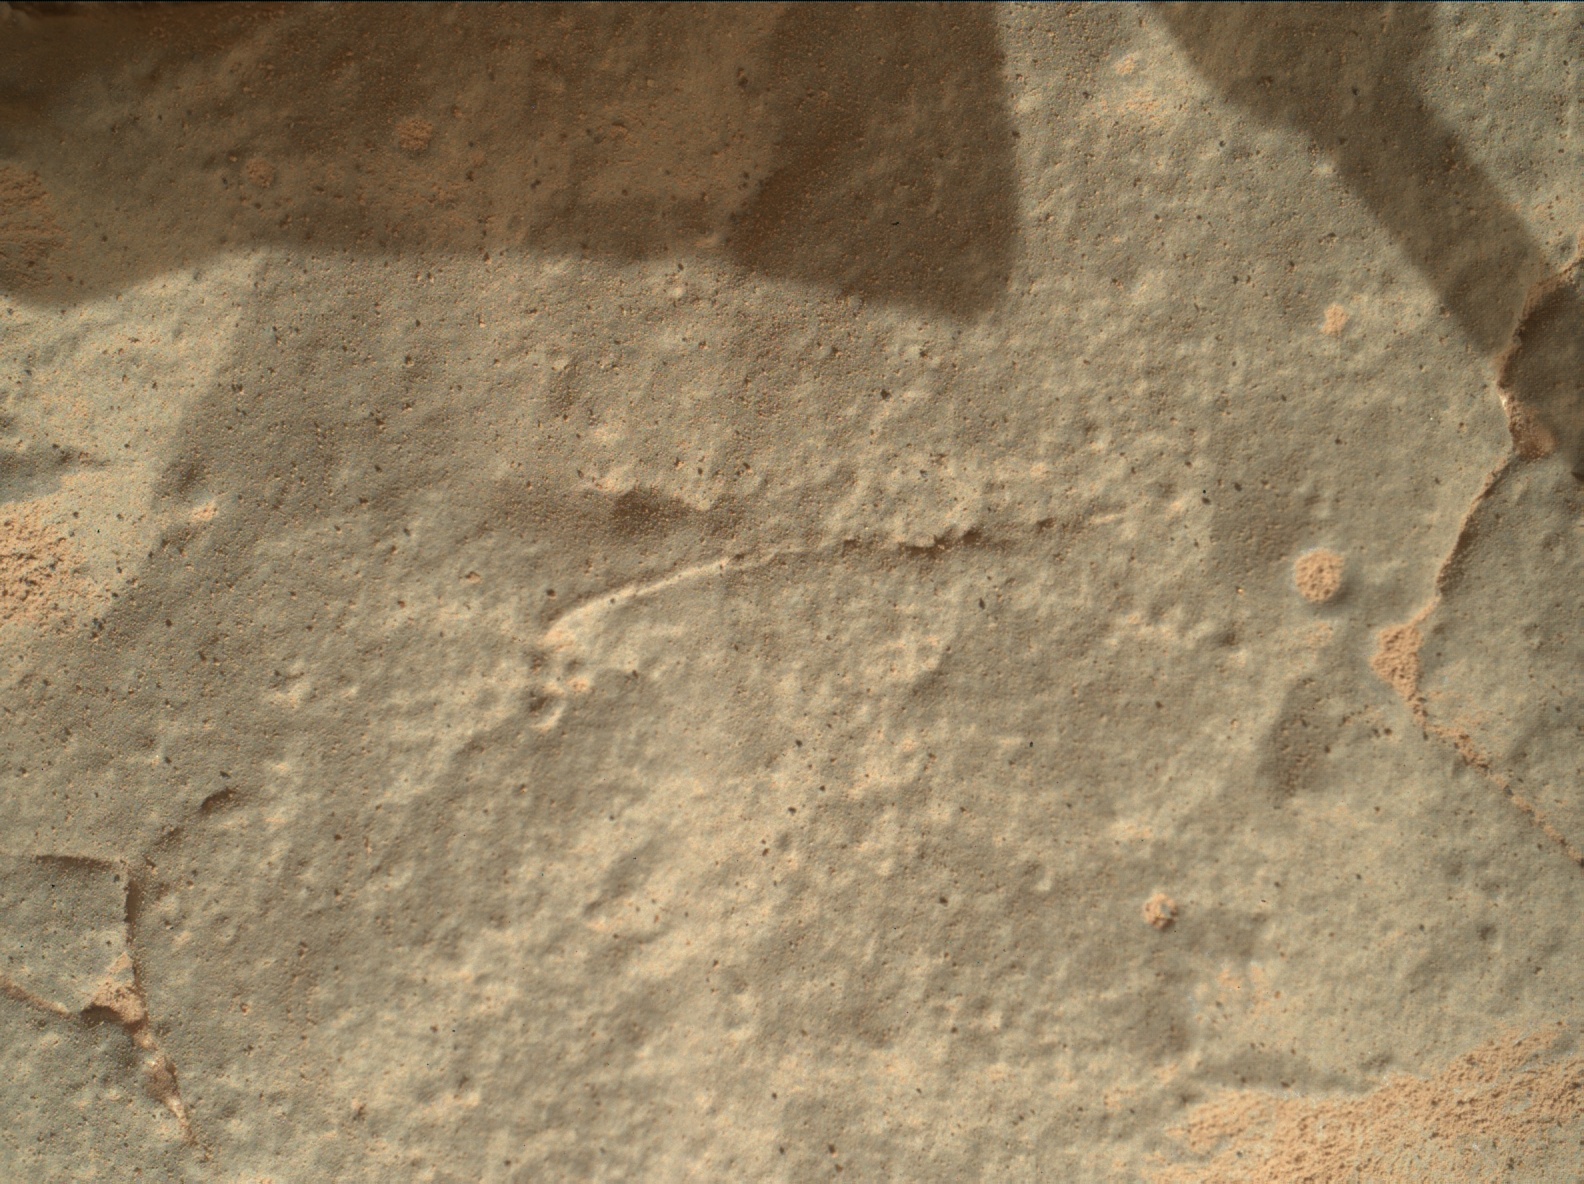 Nasa's Mars rover Curiosity acquired this image using its Mars Hand Lens Imager (MAHLI) on Sol 158